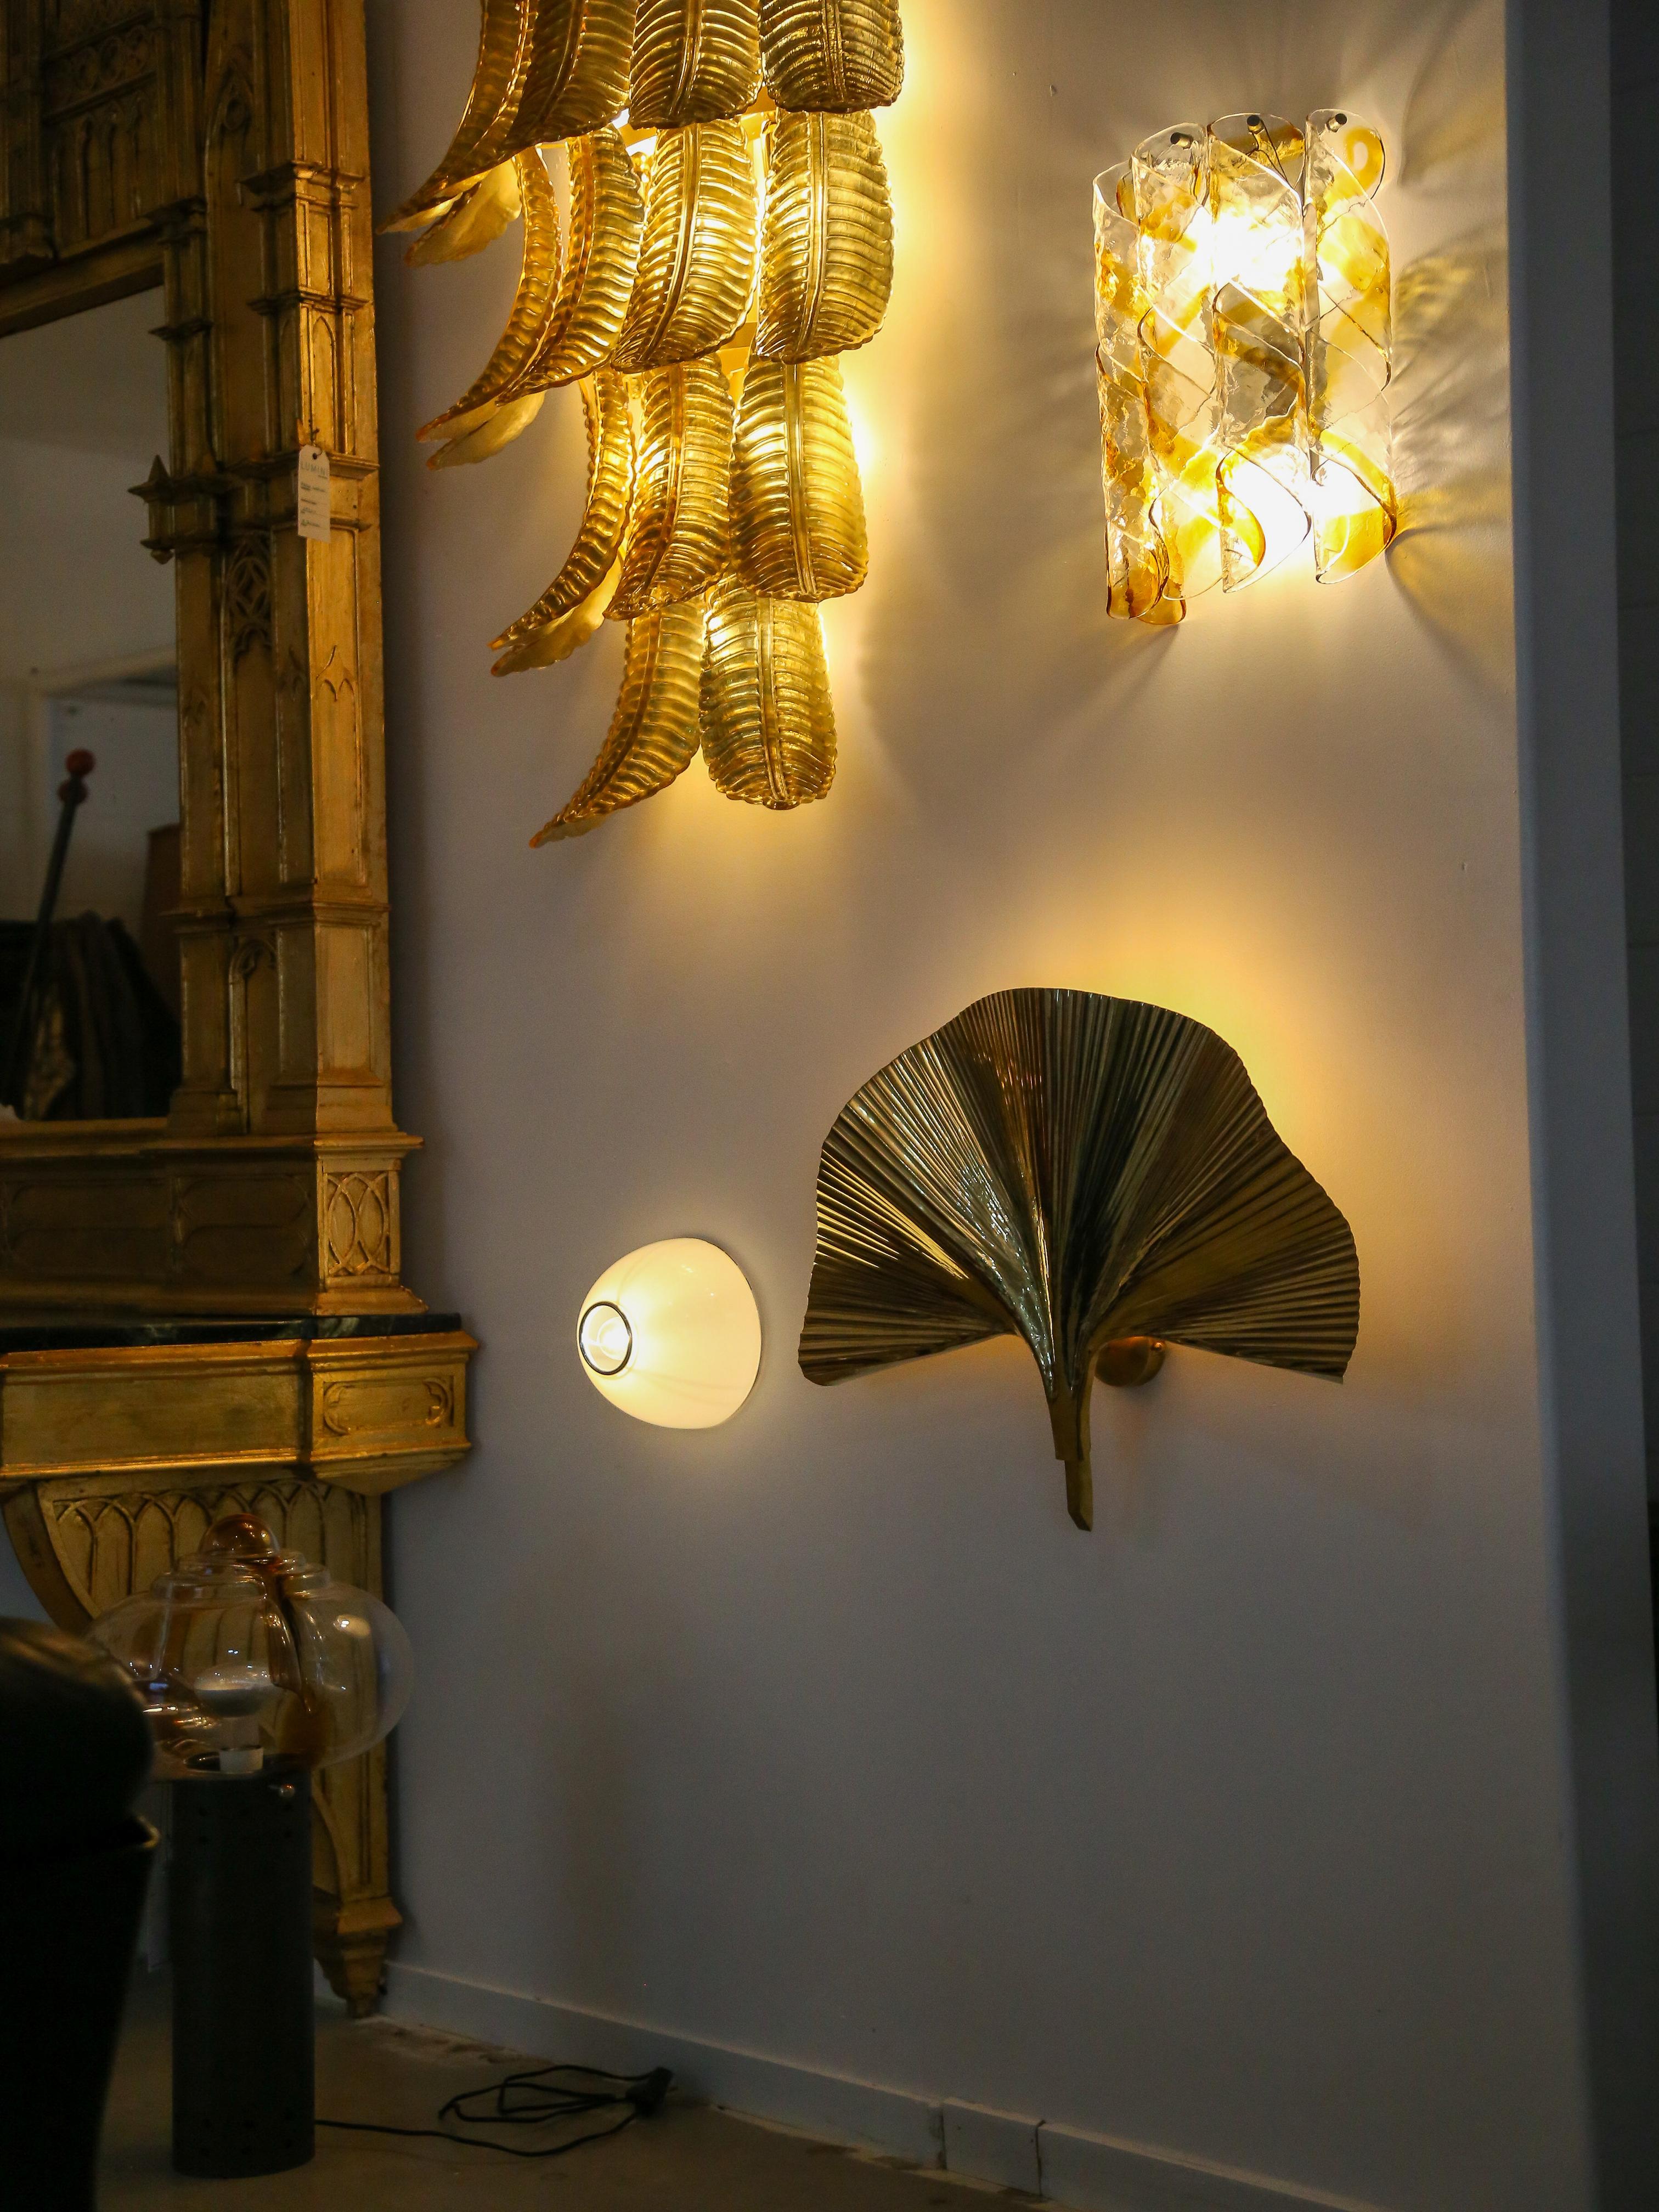 Contemporary large design wall lamp entirely made of brass with one  Ginko leaf.

This combination of brass and botanical elements creates a stylish design and nature-inspired lighting fixture. The Ginkgo Biloba is a tree known for its distinctive